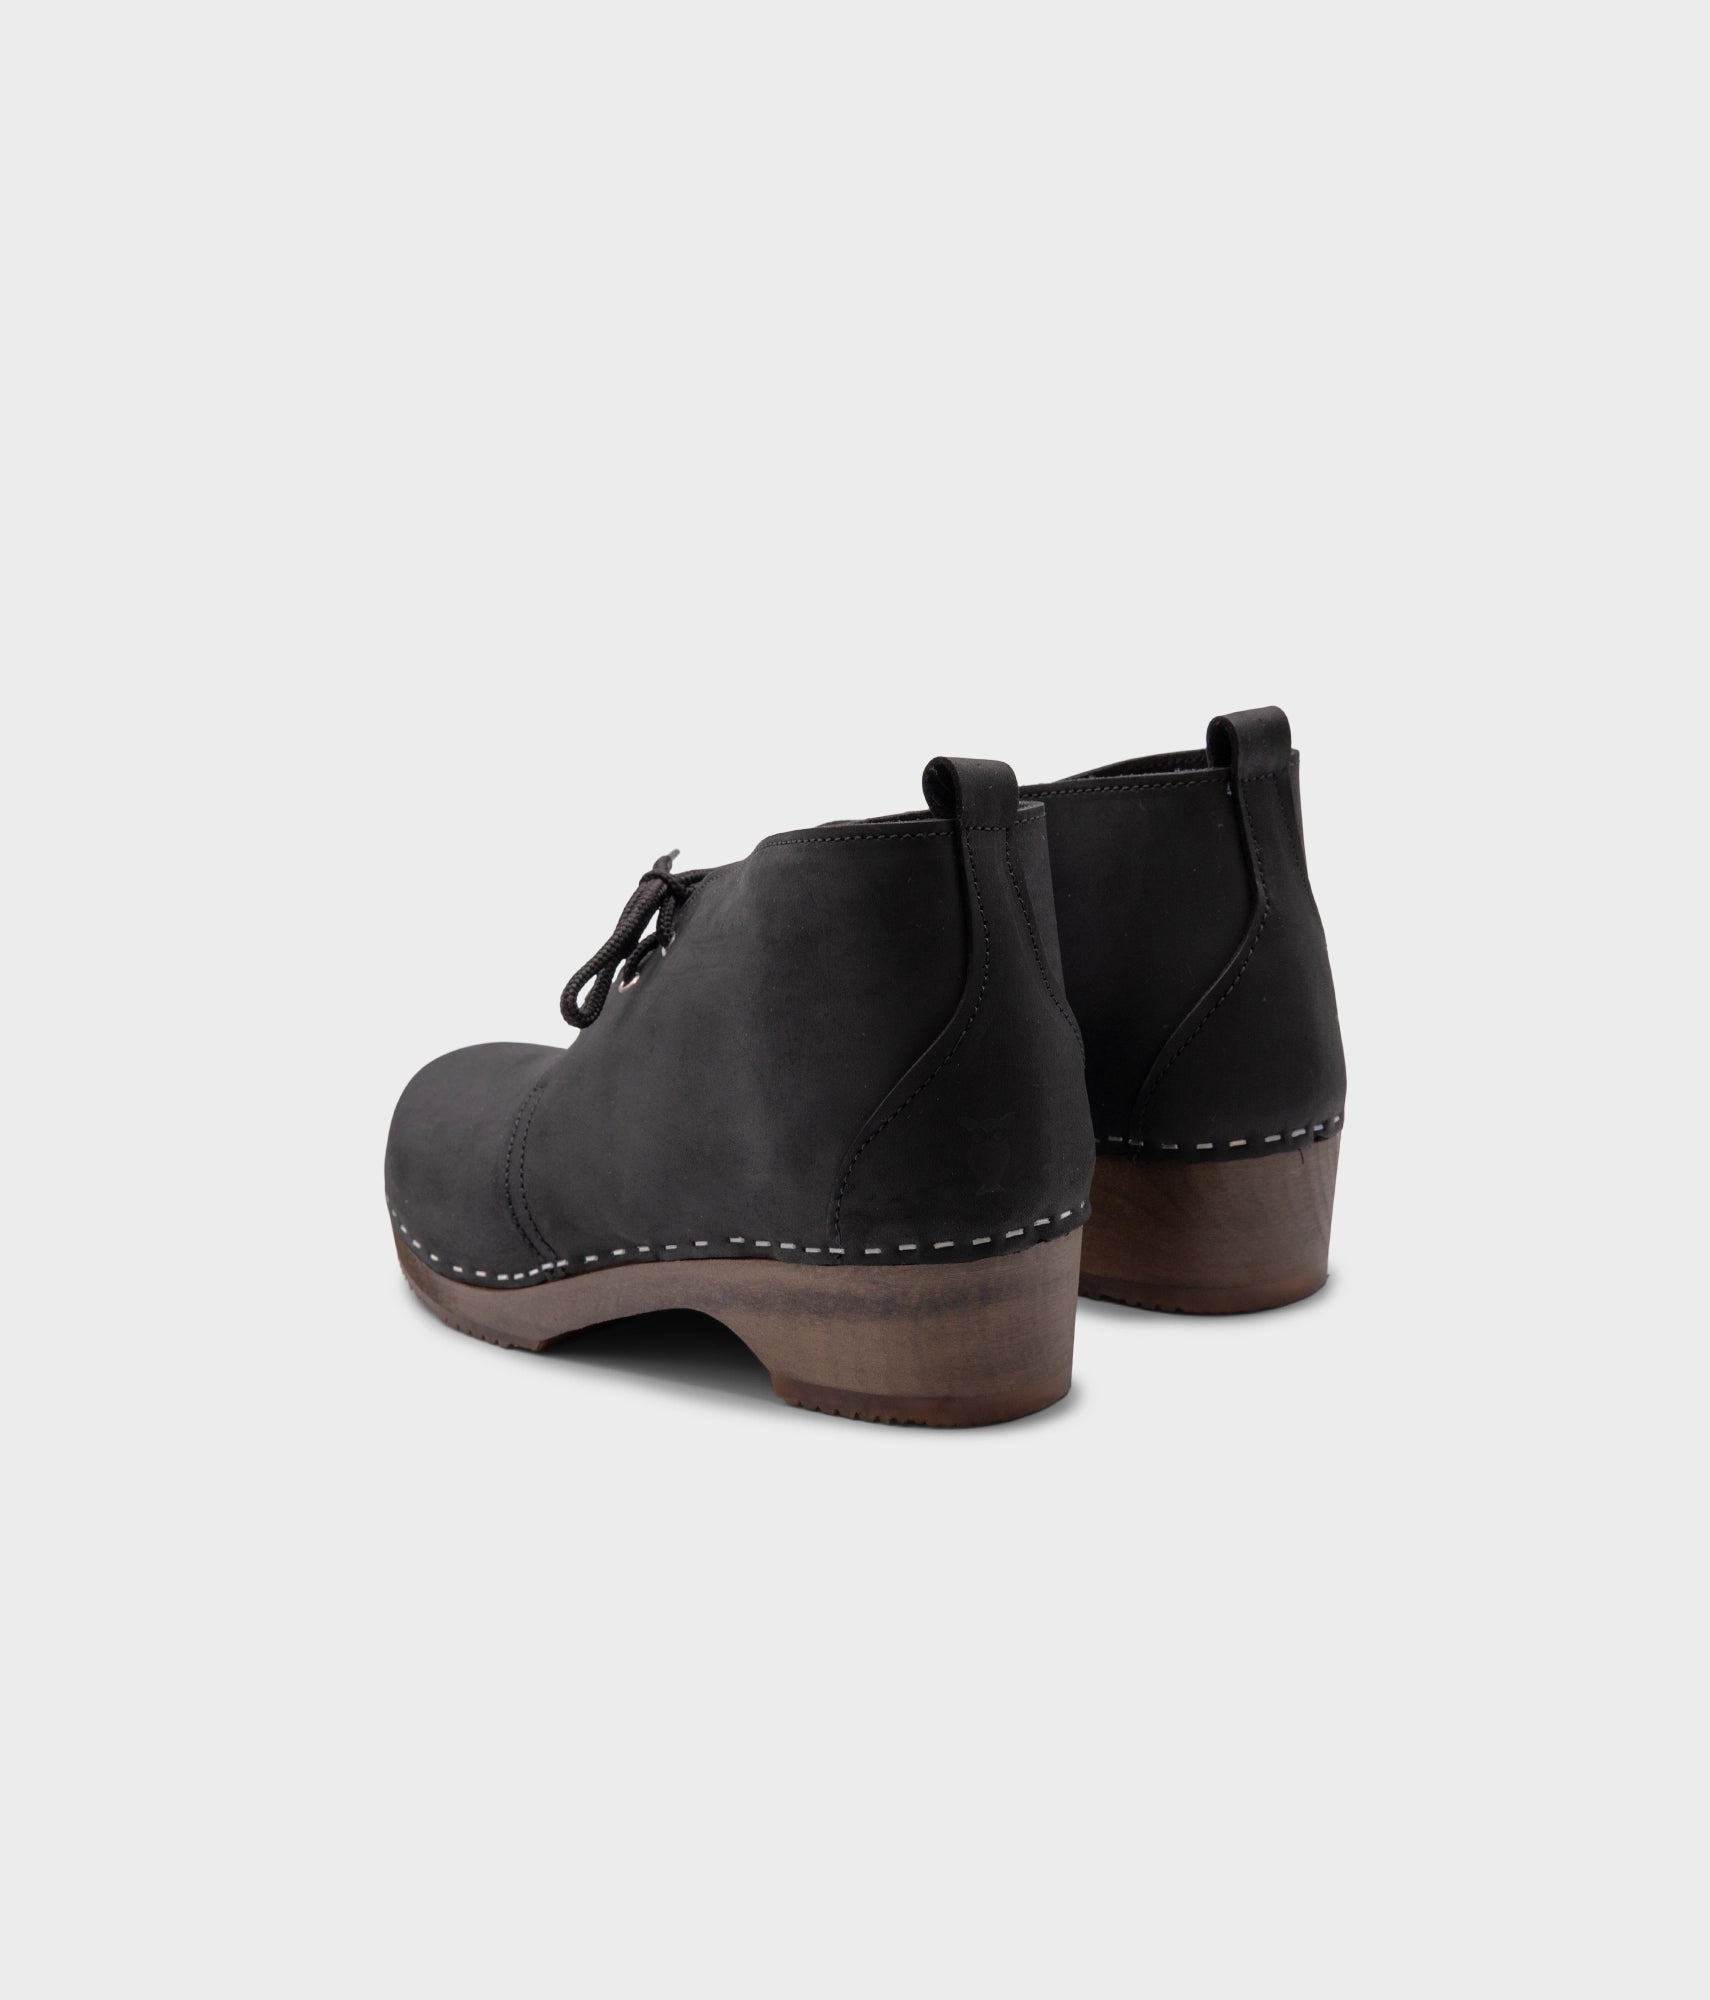 low heeled mens chukka clog boots in black nubuck leather stapled on a dark wooden base with black laces